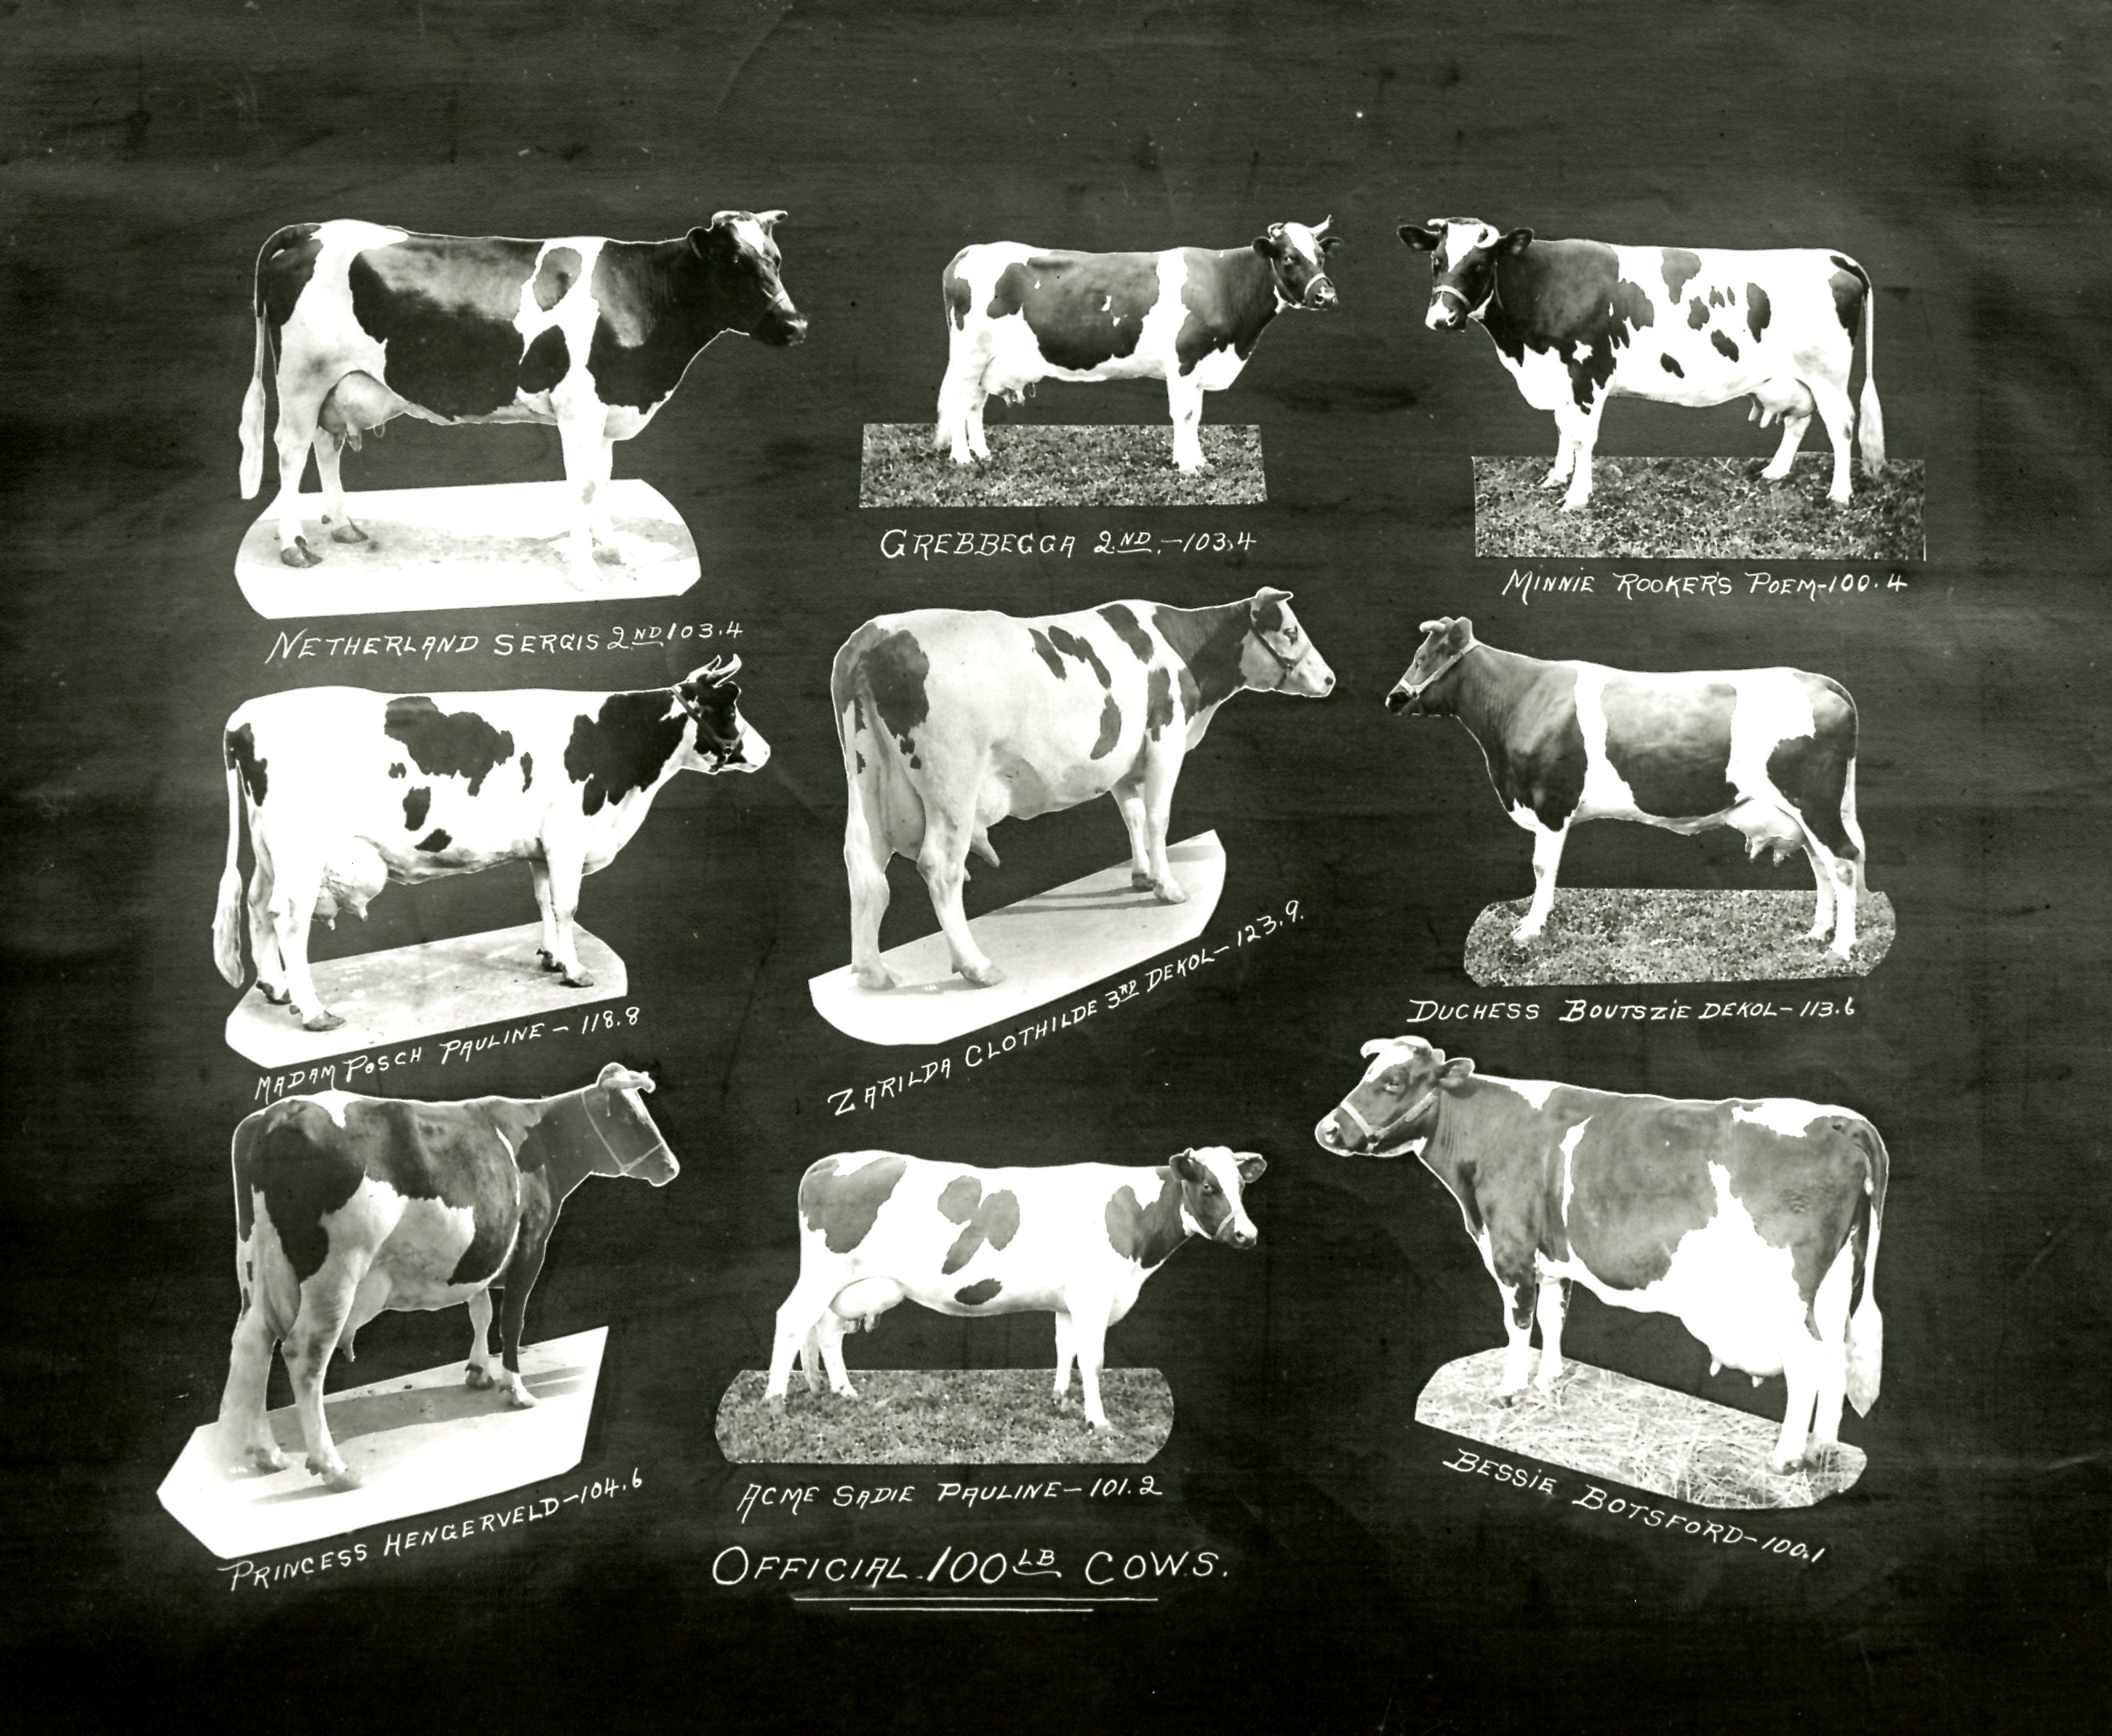 Collage of 100-Pound Cows with Zarilda Clothilde in Centre, Circa 1912 (JPG) Opens in new window